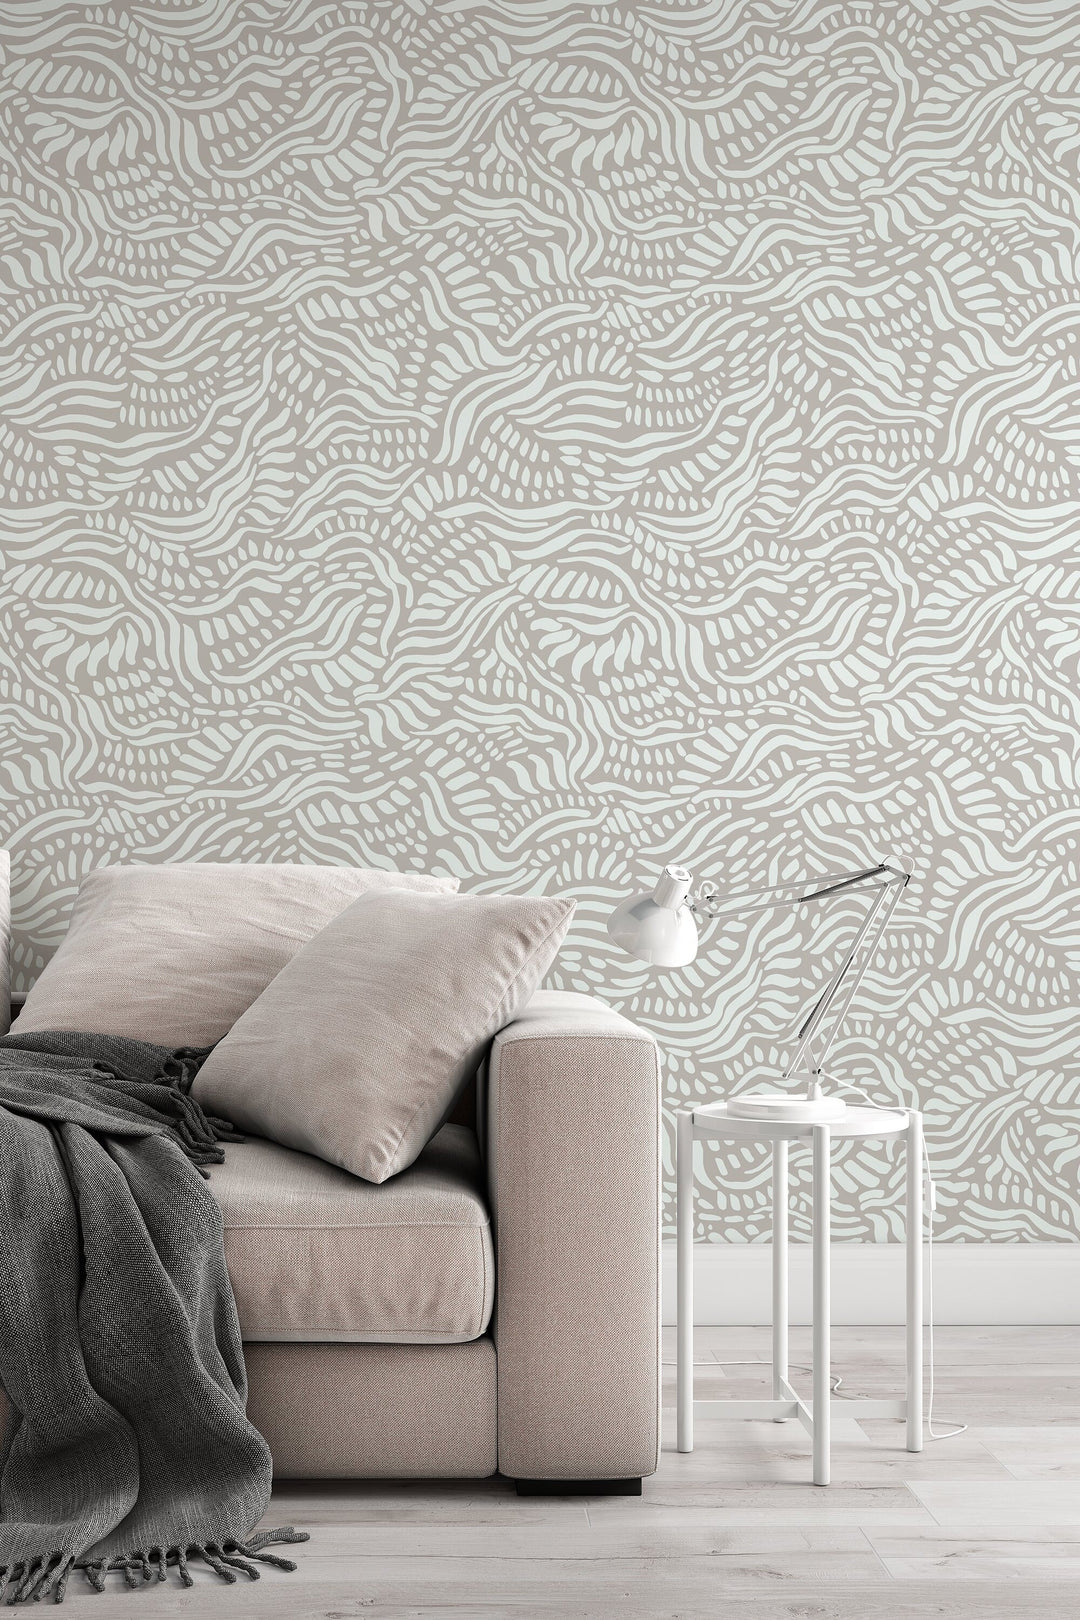 Waves Wallpaper - Tumbling Ocean Waves - White Swirl Abstract Beach Removable Self Adhesive Wallpaper Roll pattern wallpaper #3087